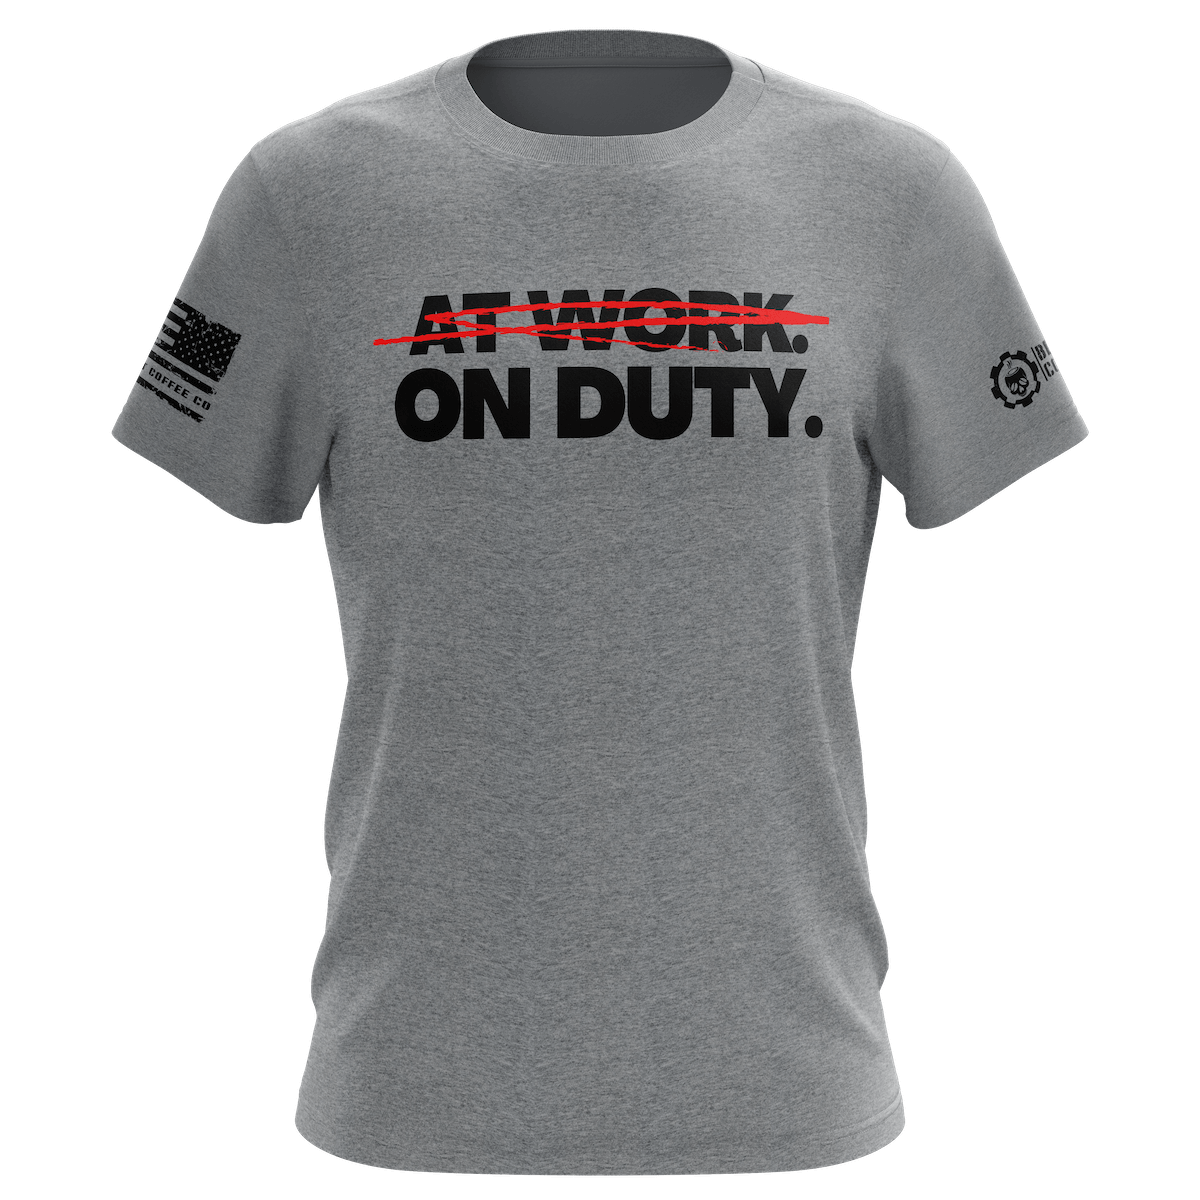 At Work ON DUTY Heather Grey T-Shirt